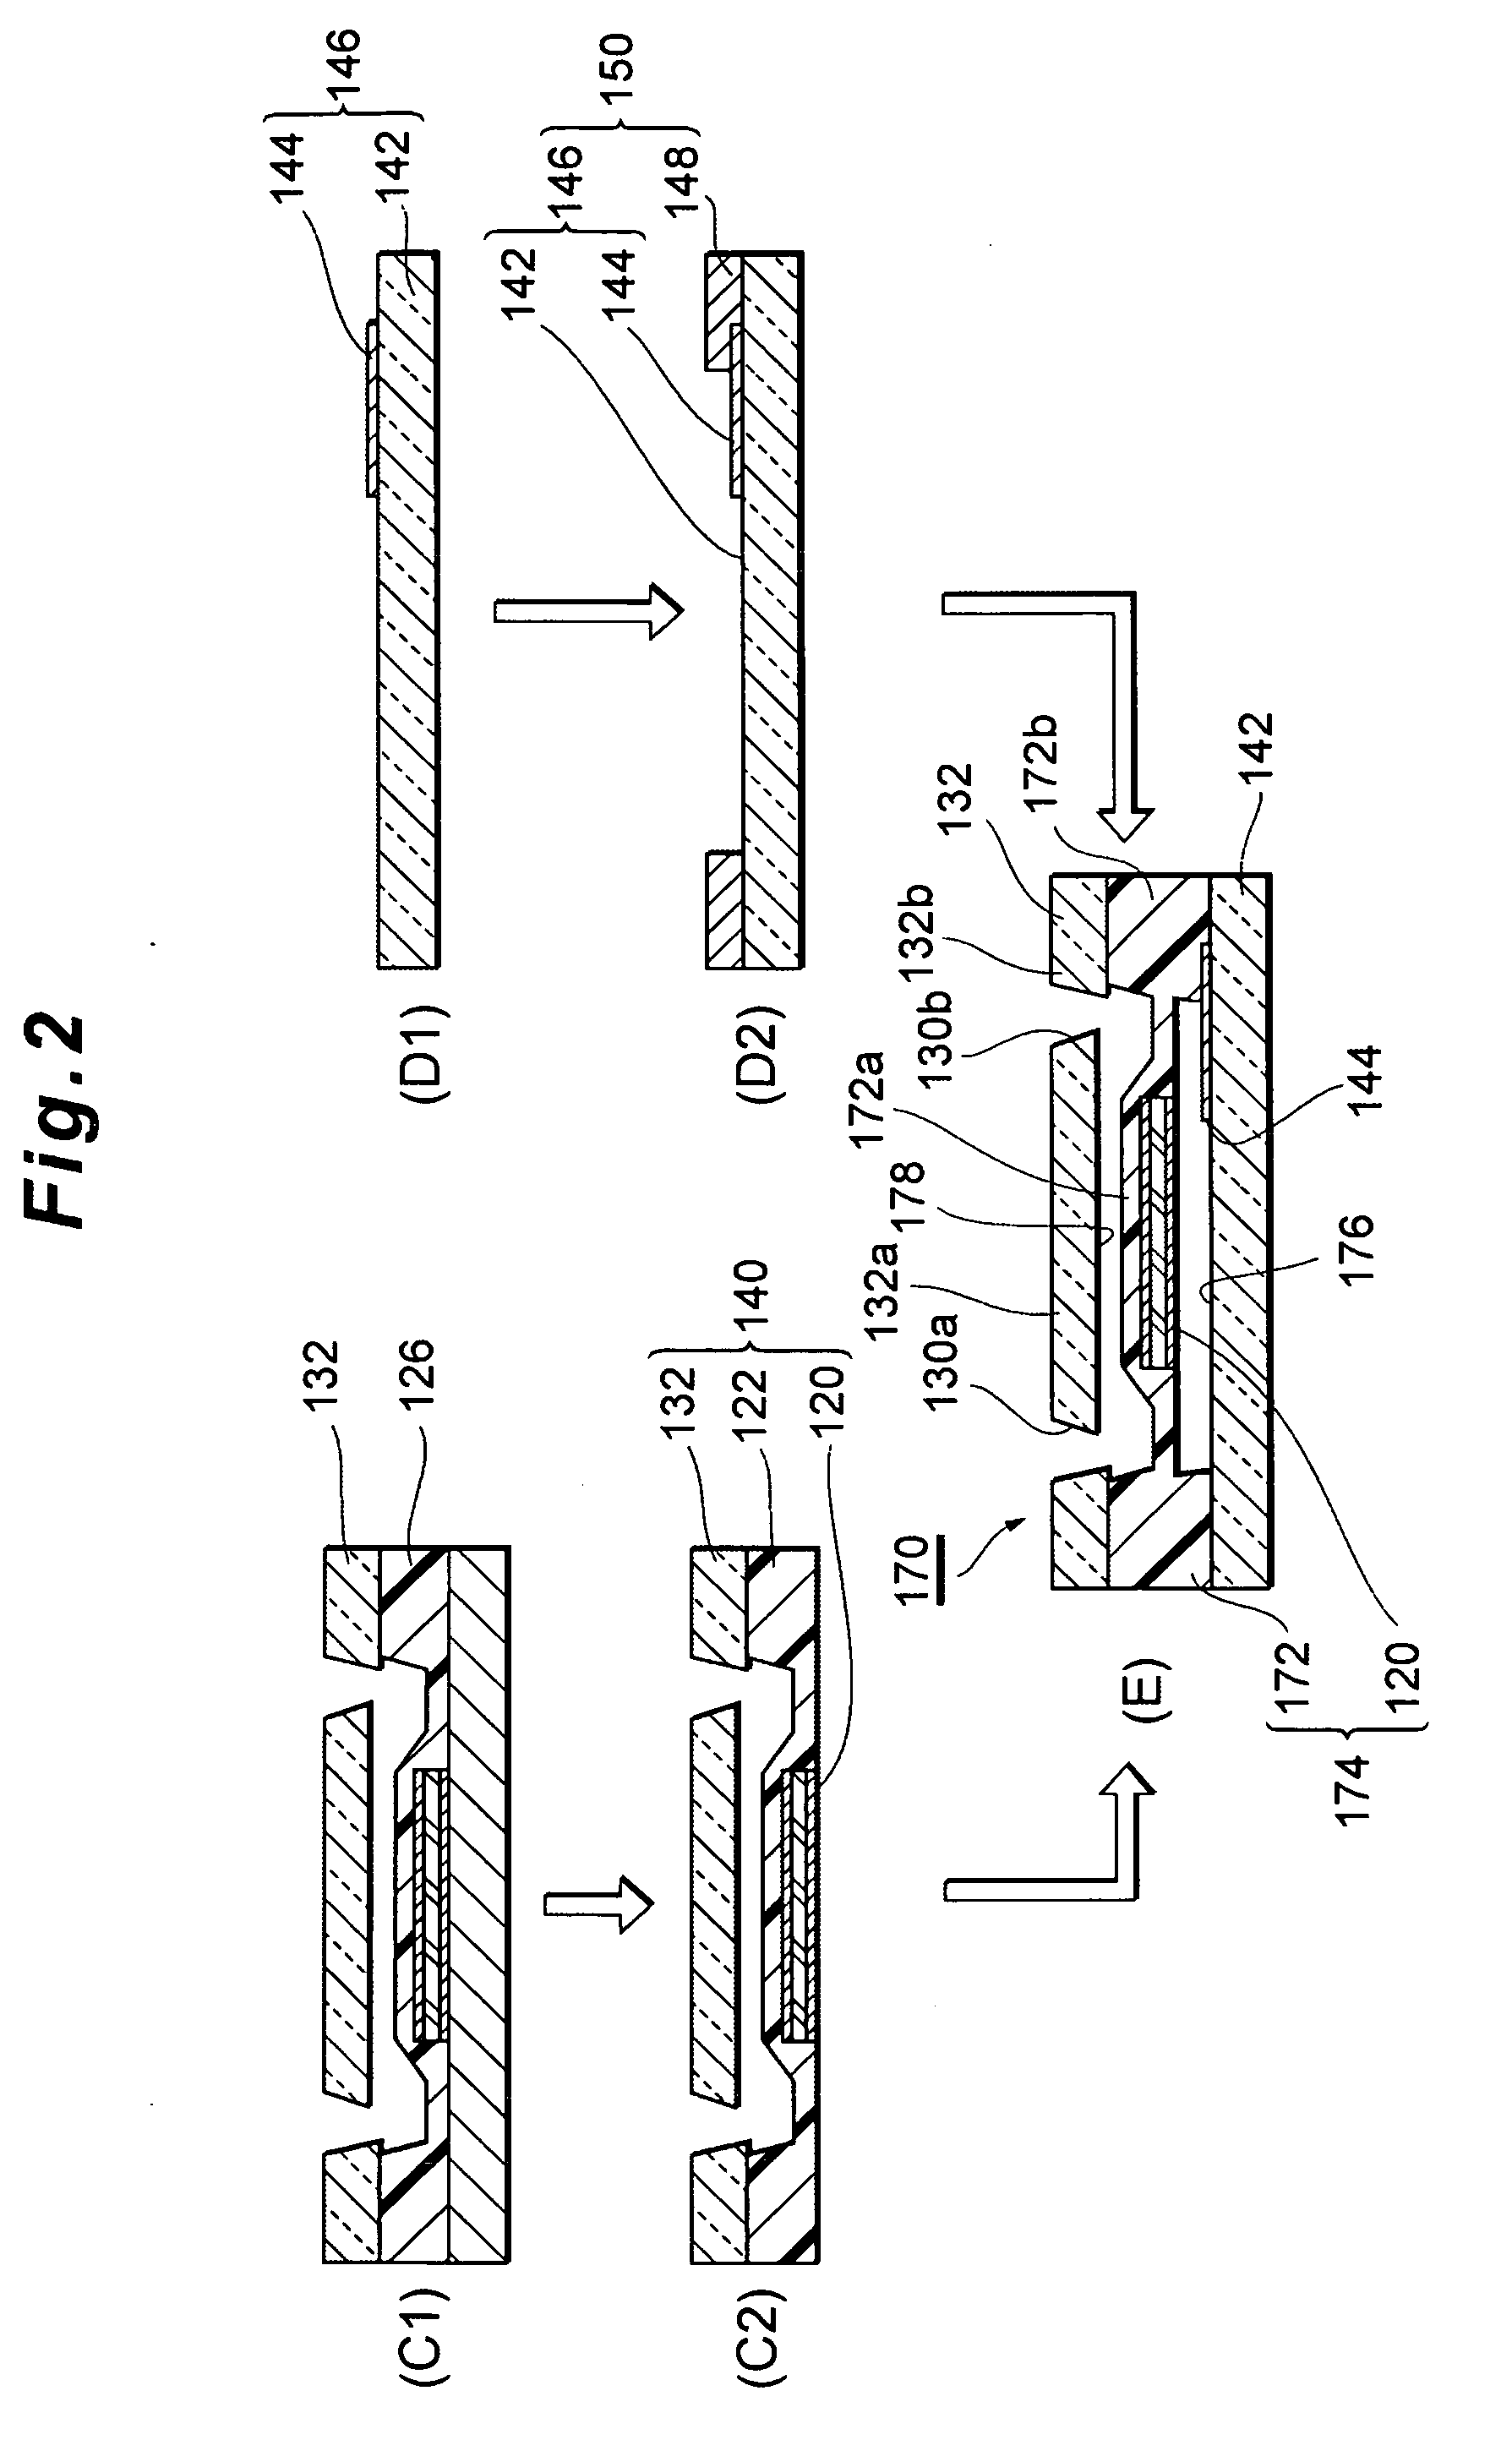 Piezoelectric pump and fluid transferring system